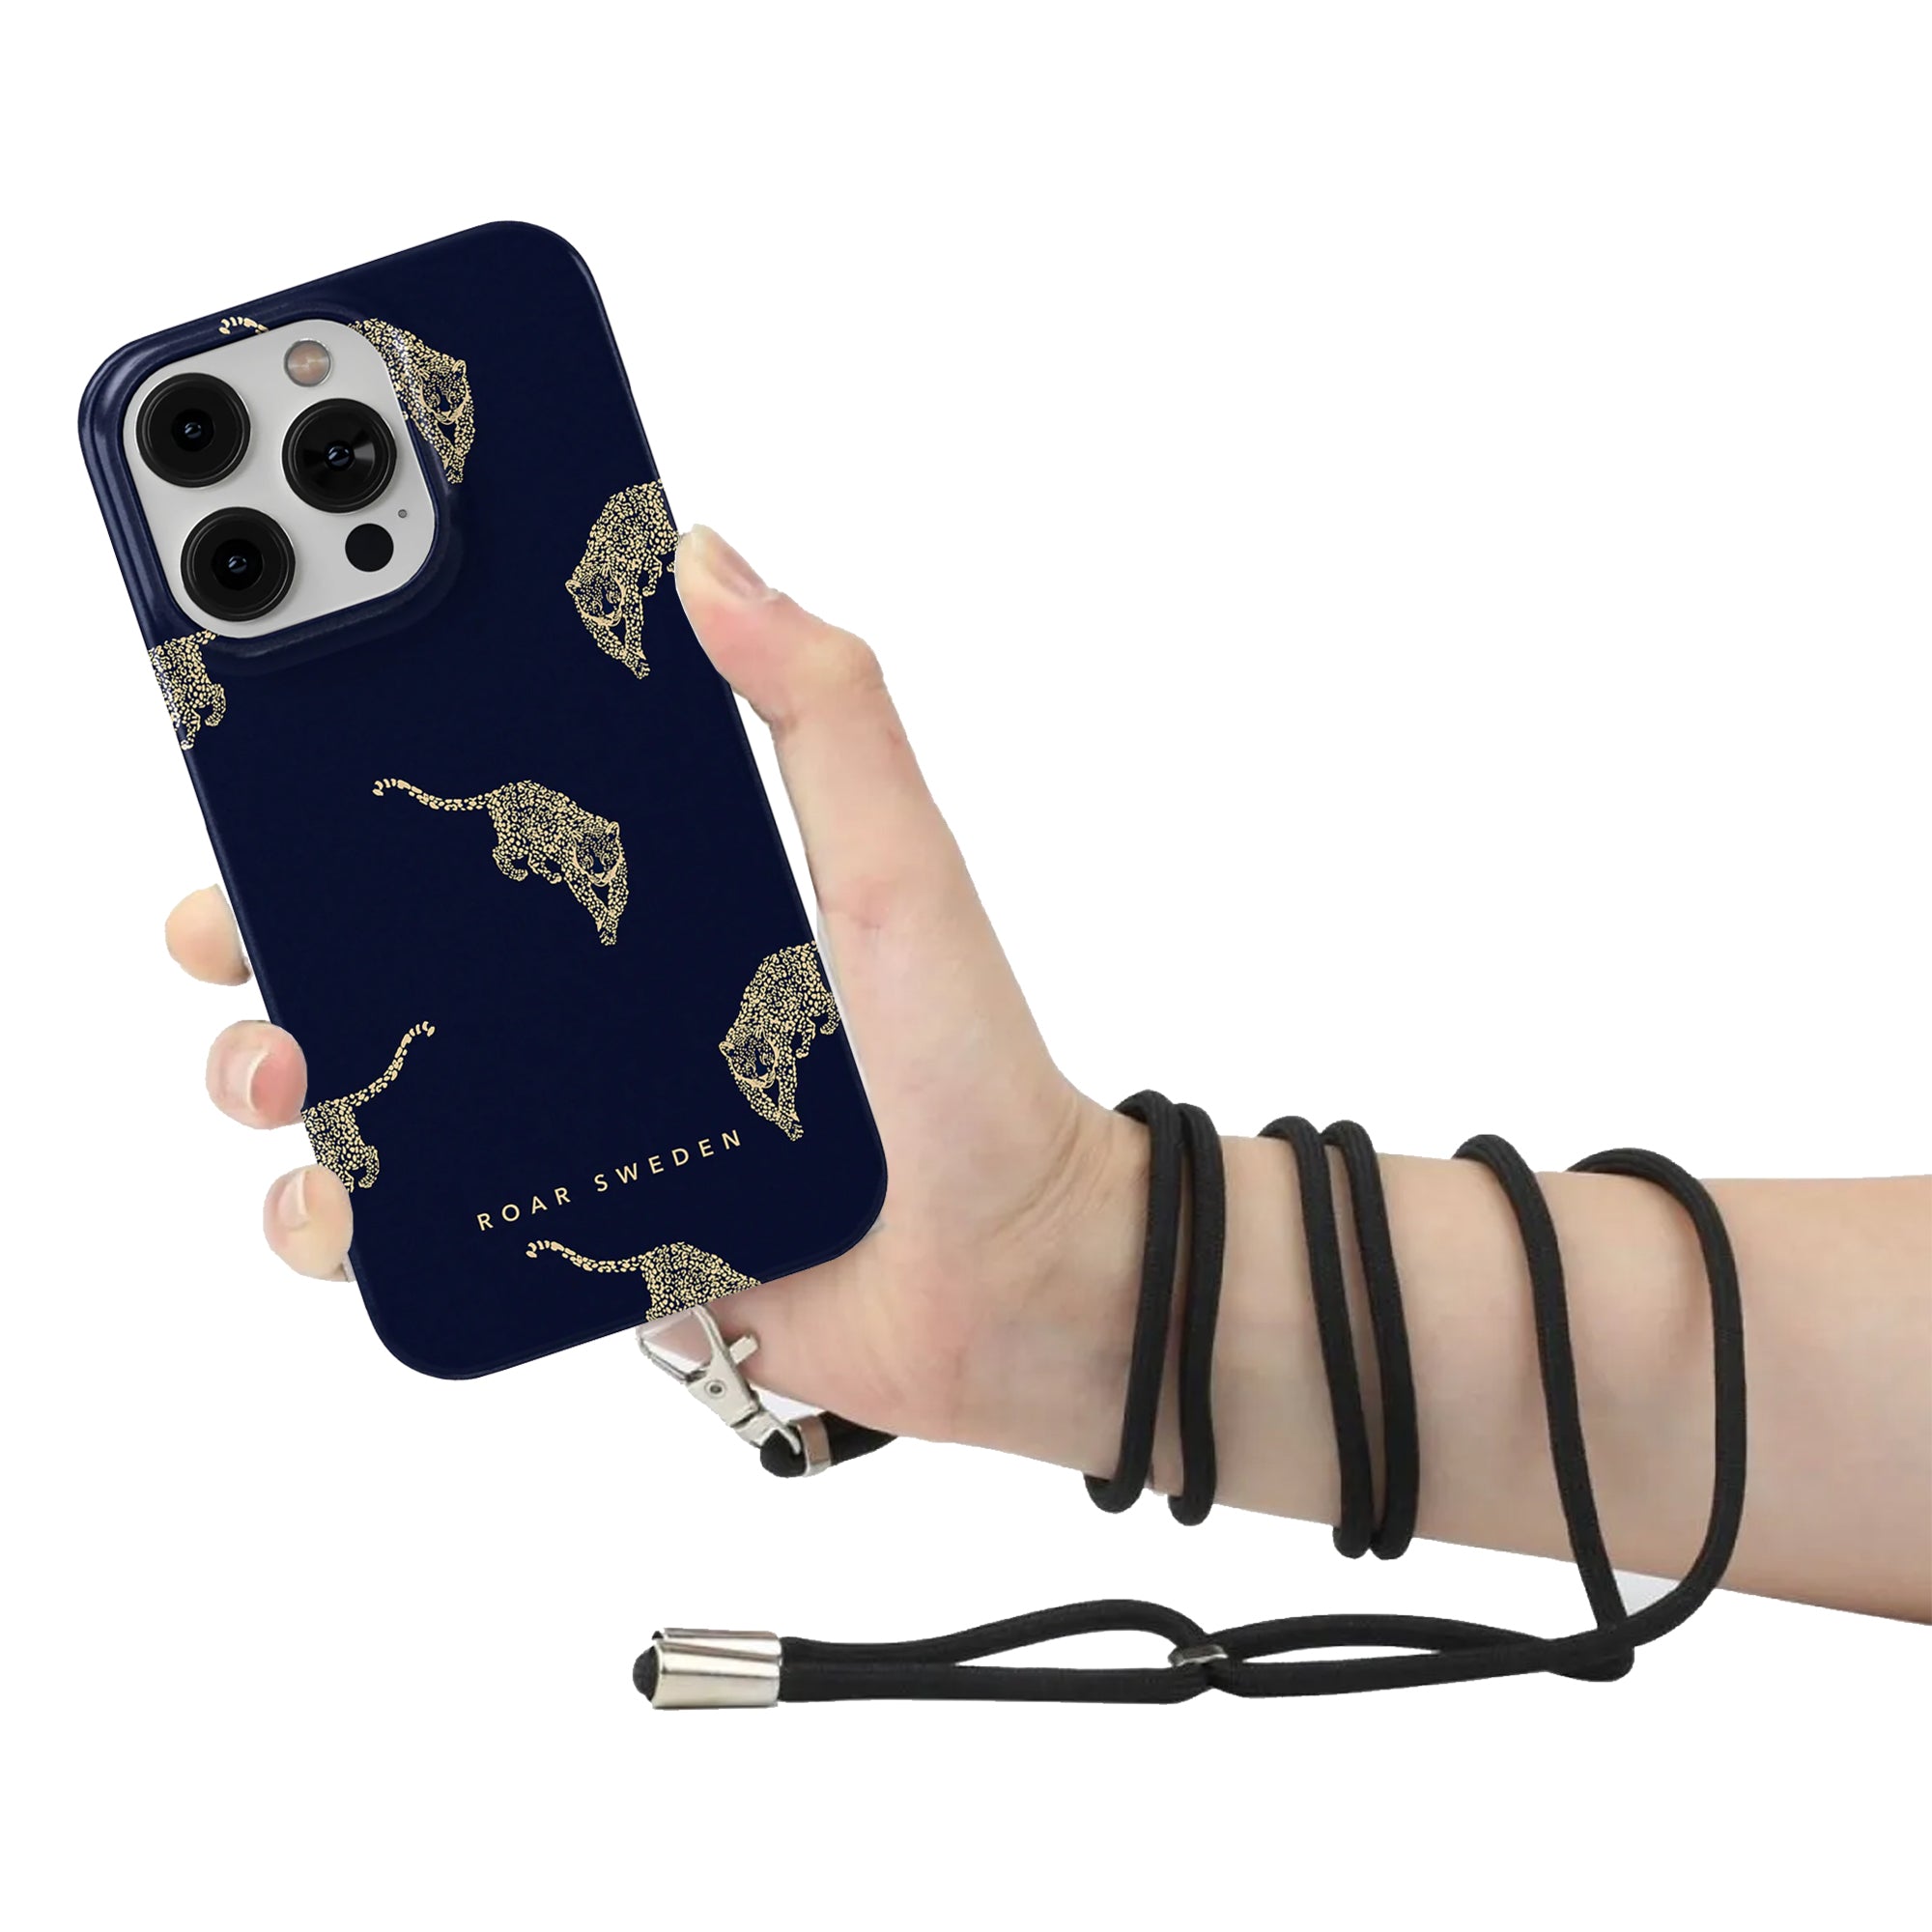 Hand holding a smartphone with a blue case featuring leopard designs and the words "ROAR SWEDEN" printed on it, wrist wrapped with a Bärrem för mobilskal.